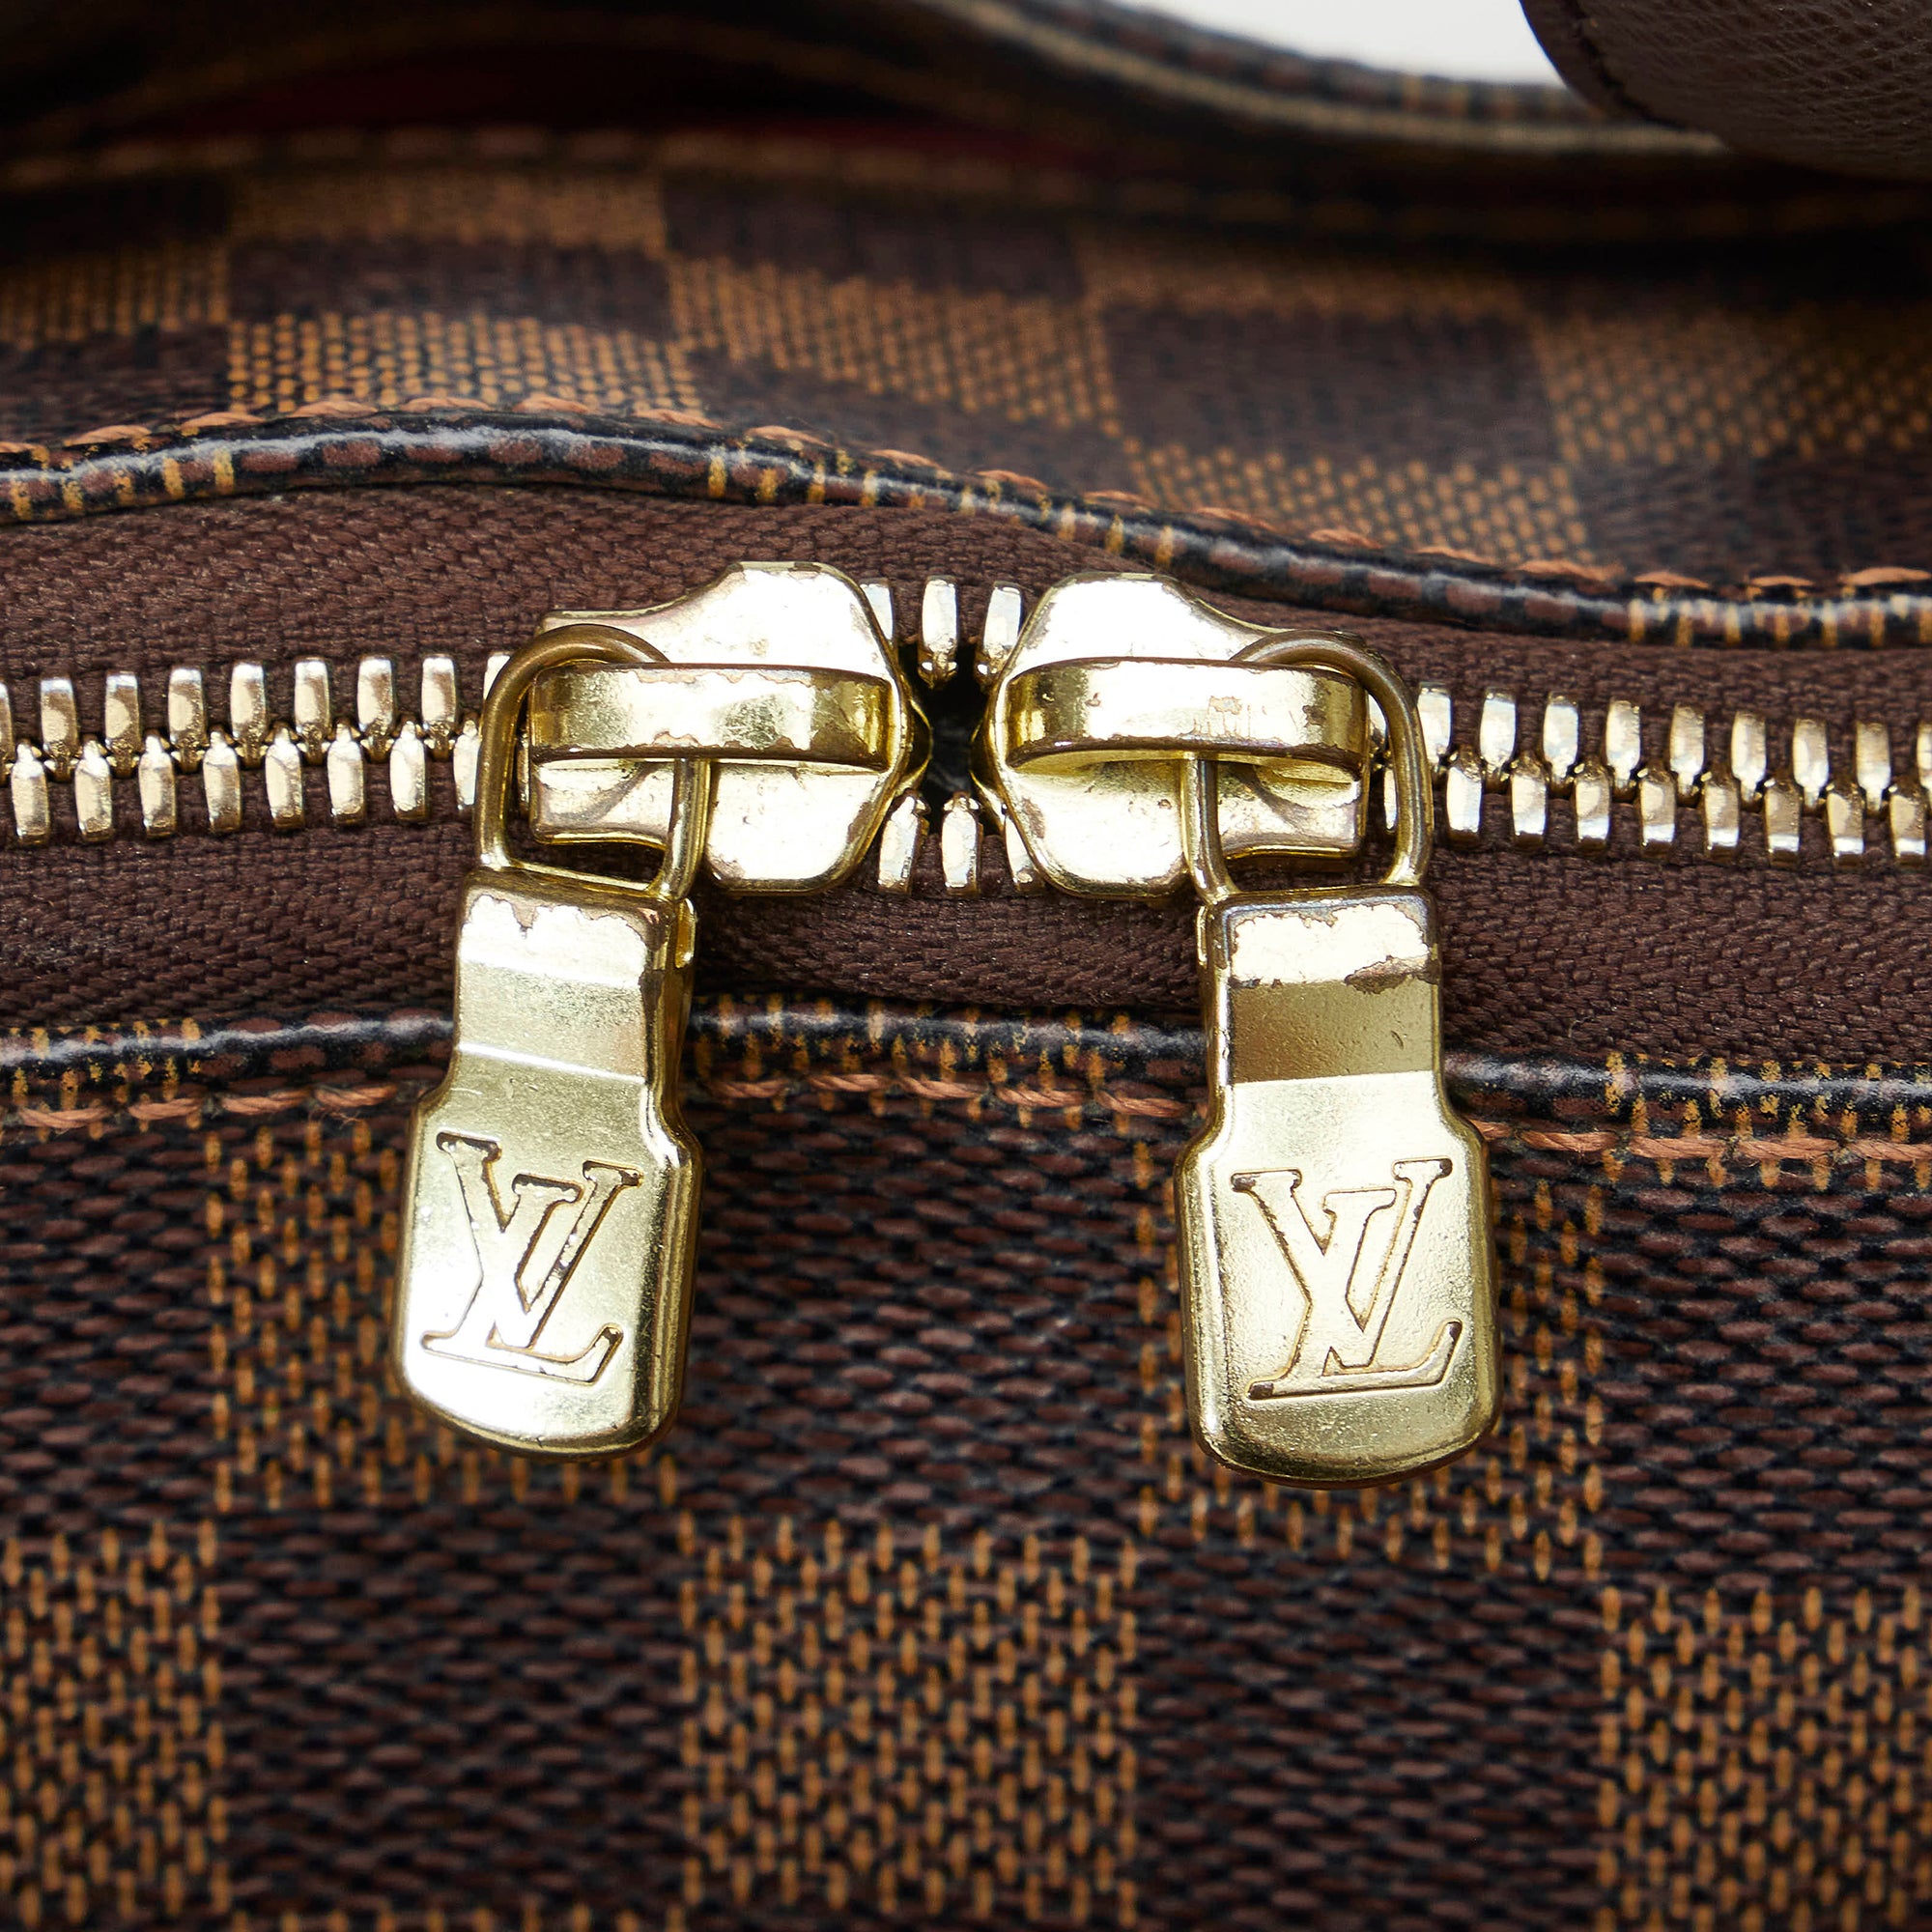 Belem MM in 2023  Louis vuitton shoulder bag, Louis vuitton, Things to sell